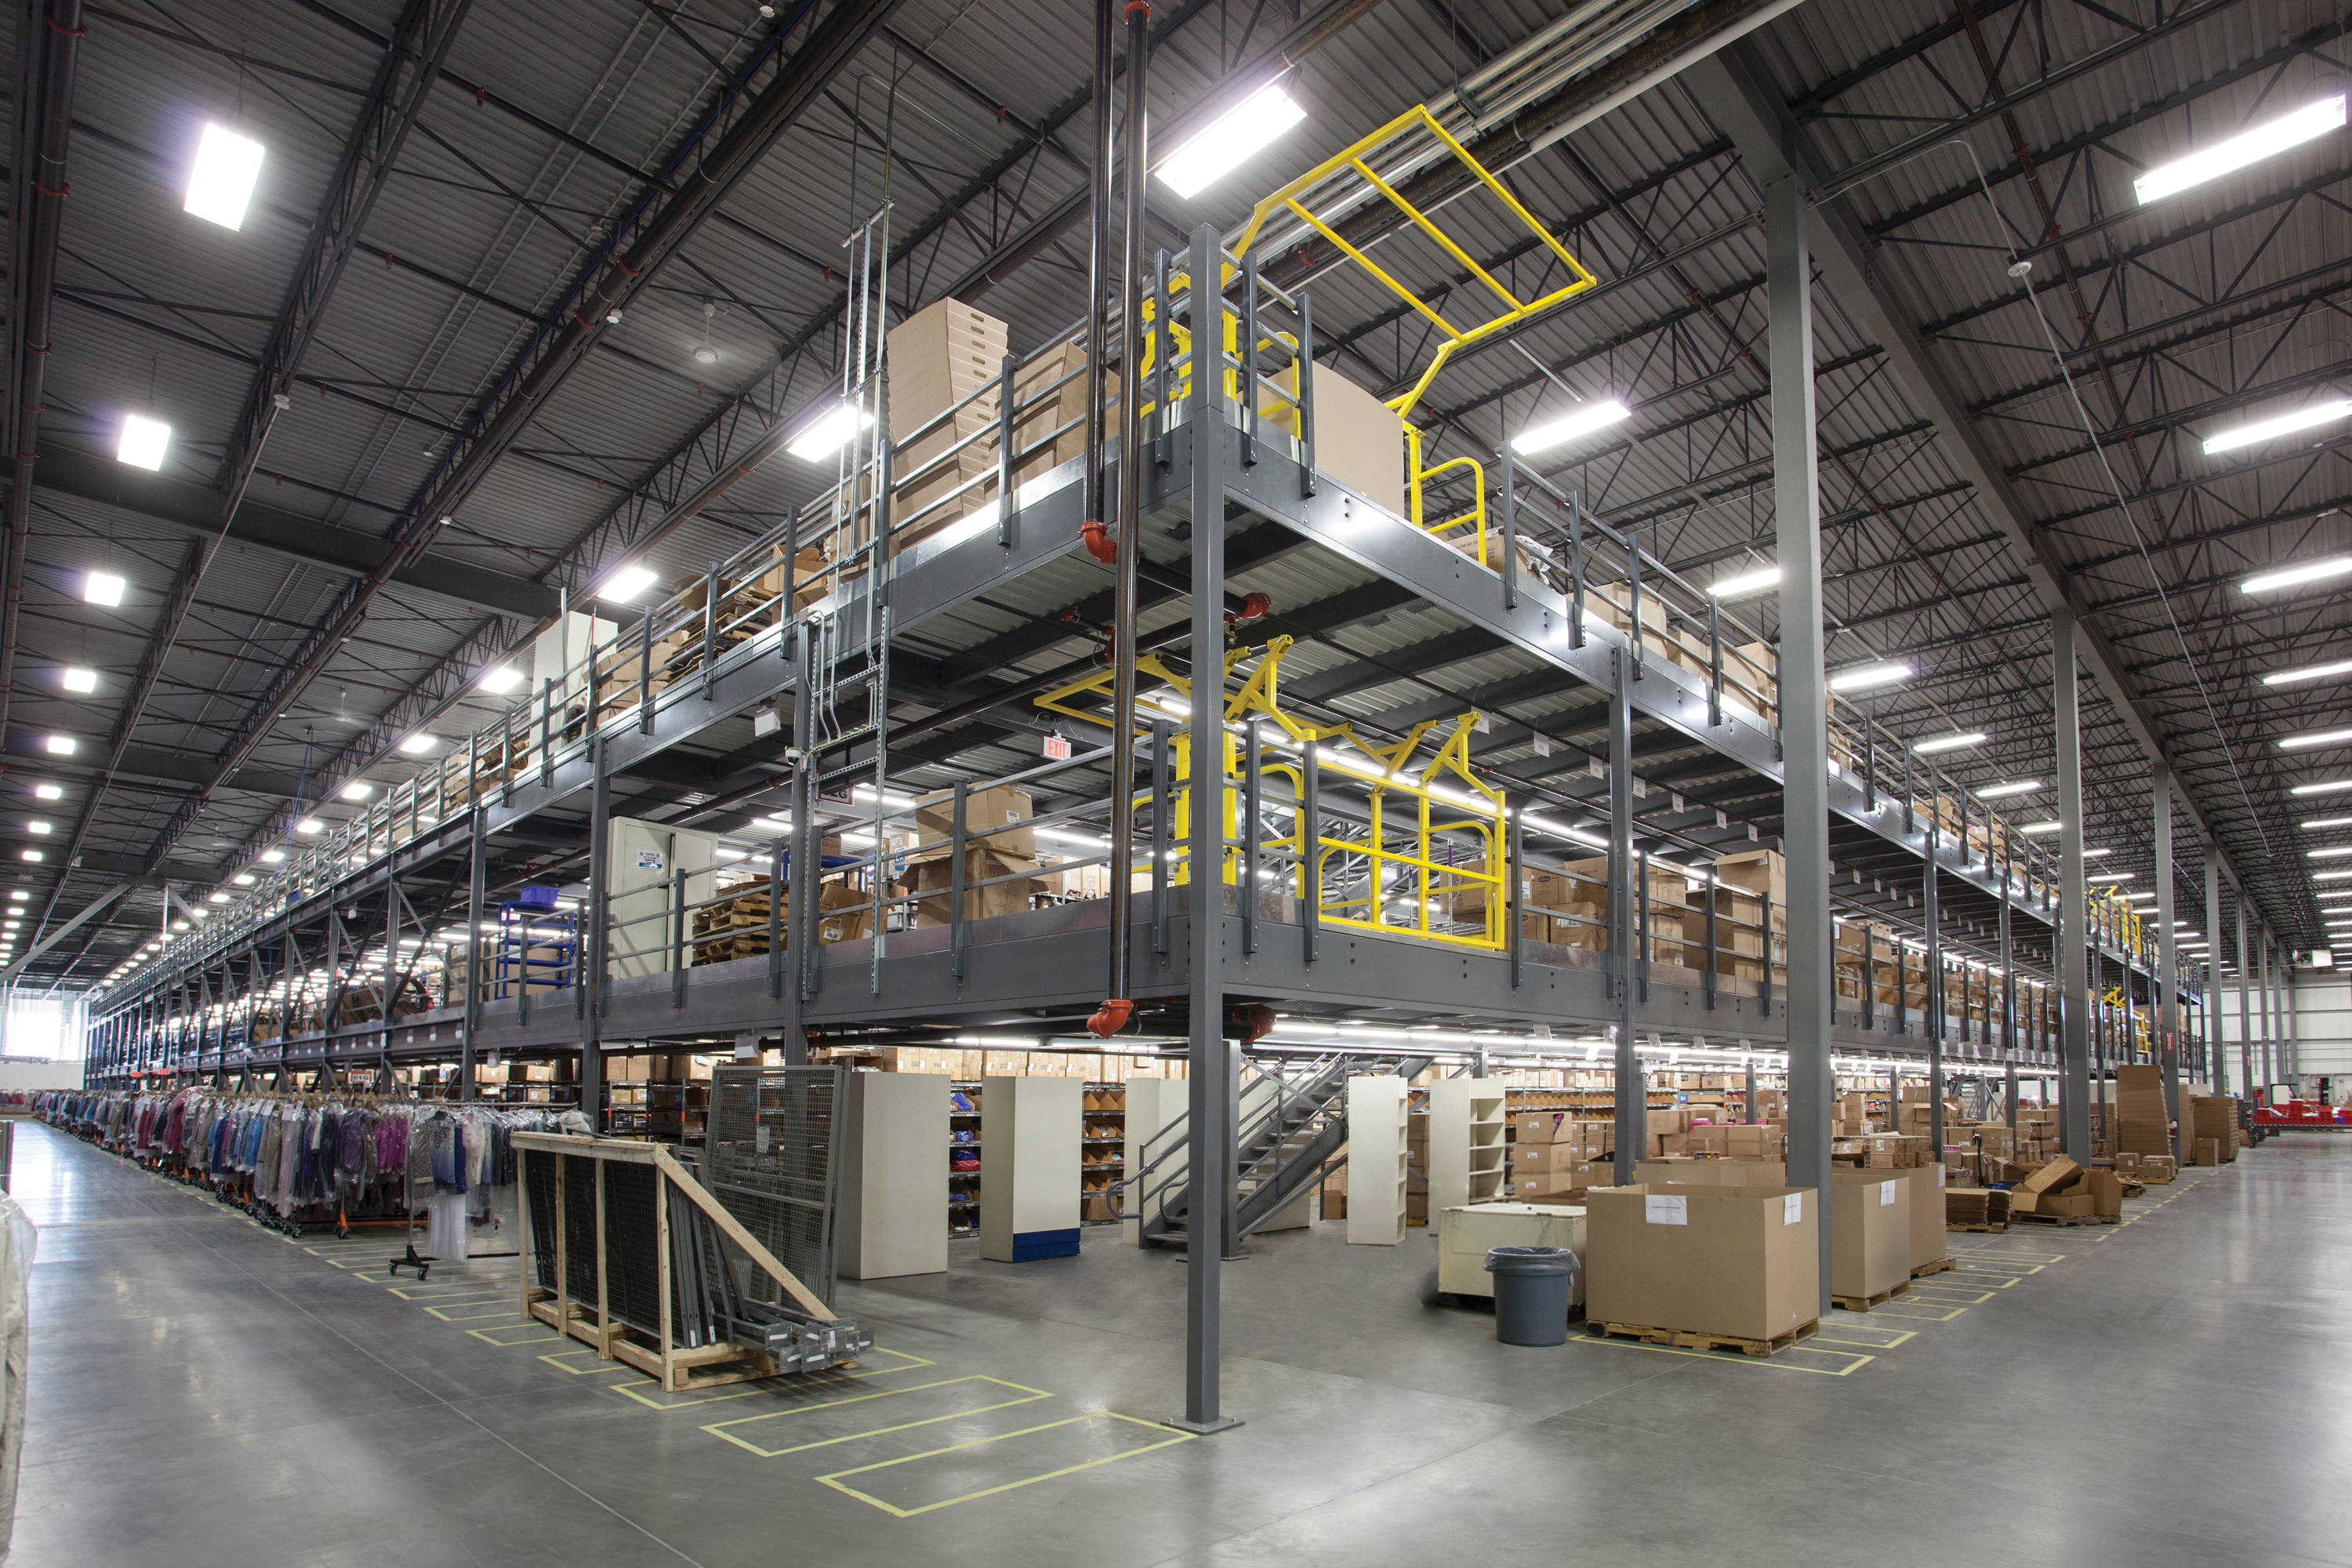 Two story mezzanine with rotating mezzanine gates, located installed and designed in warehouse.